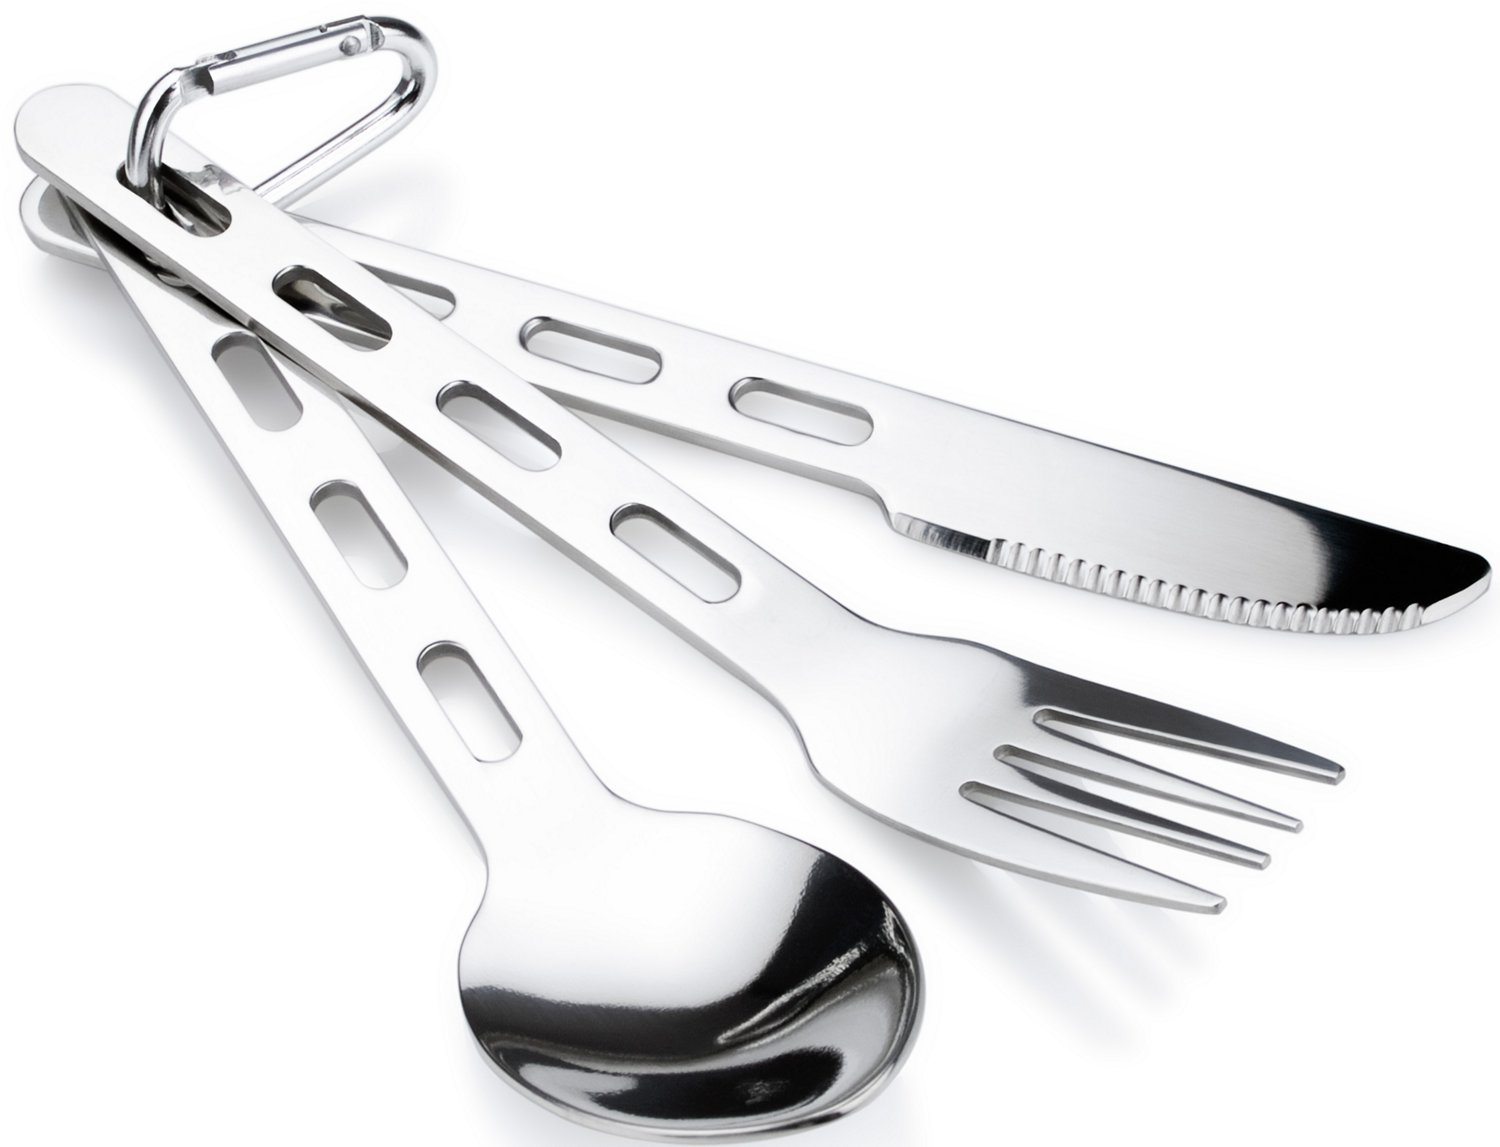 GSI　Outdoors　Ring　Glacier　3-Piece　Stainless　Steel　Cutlery　Academy